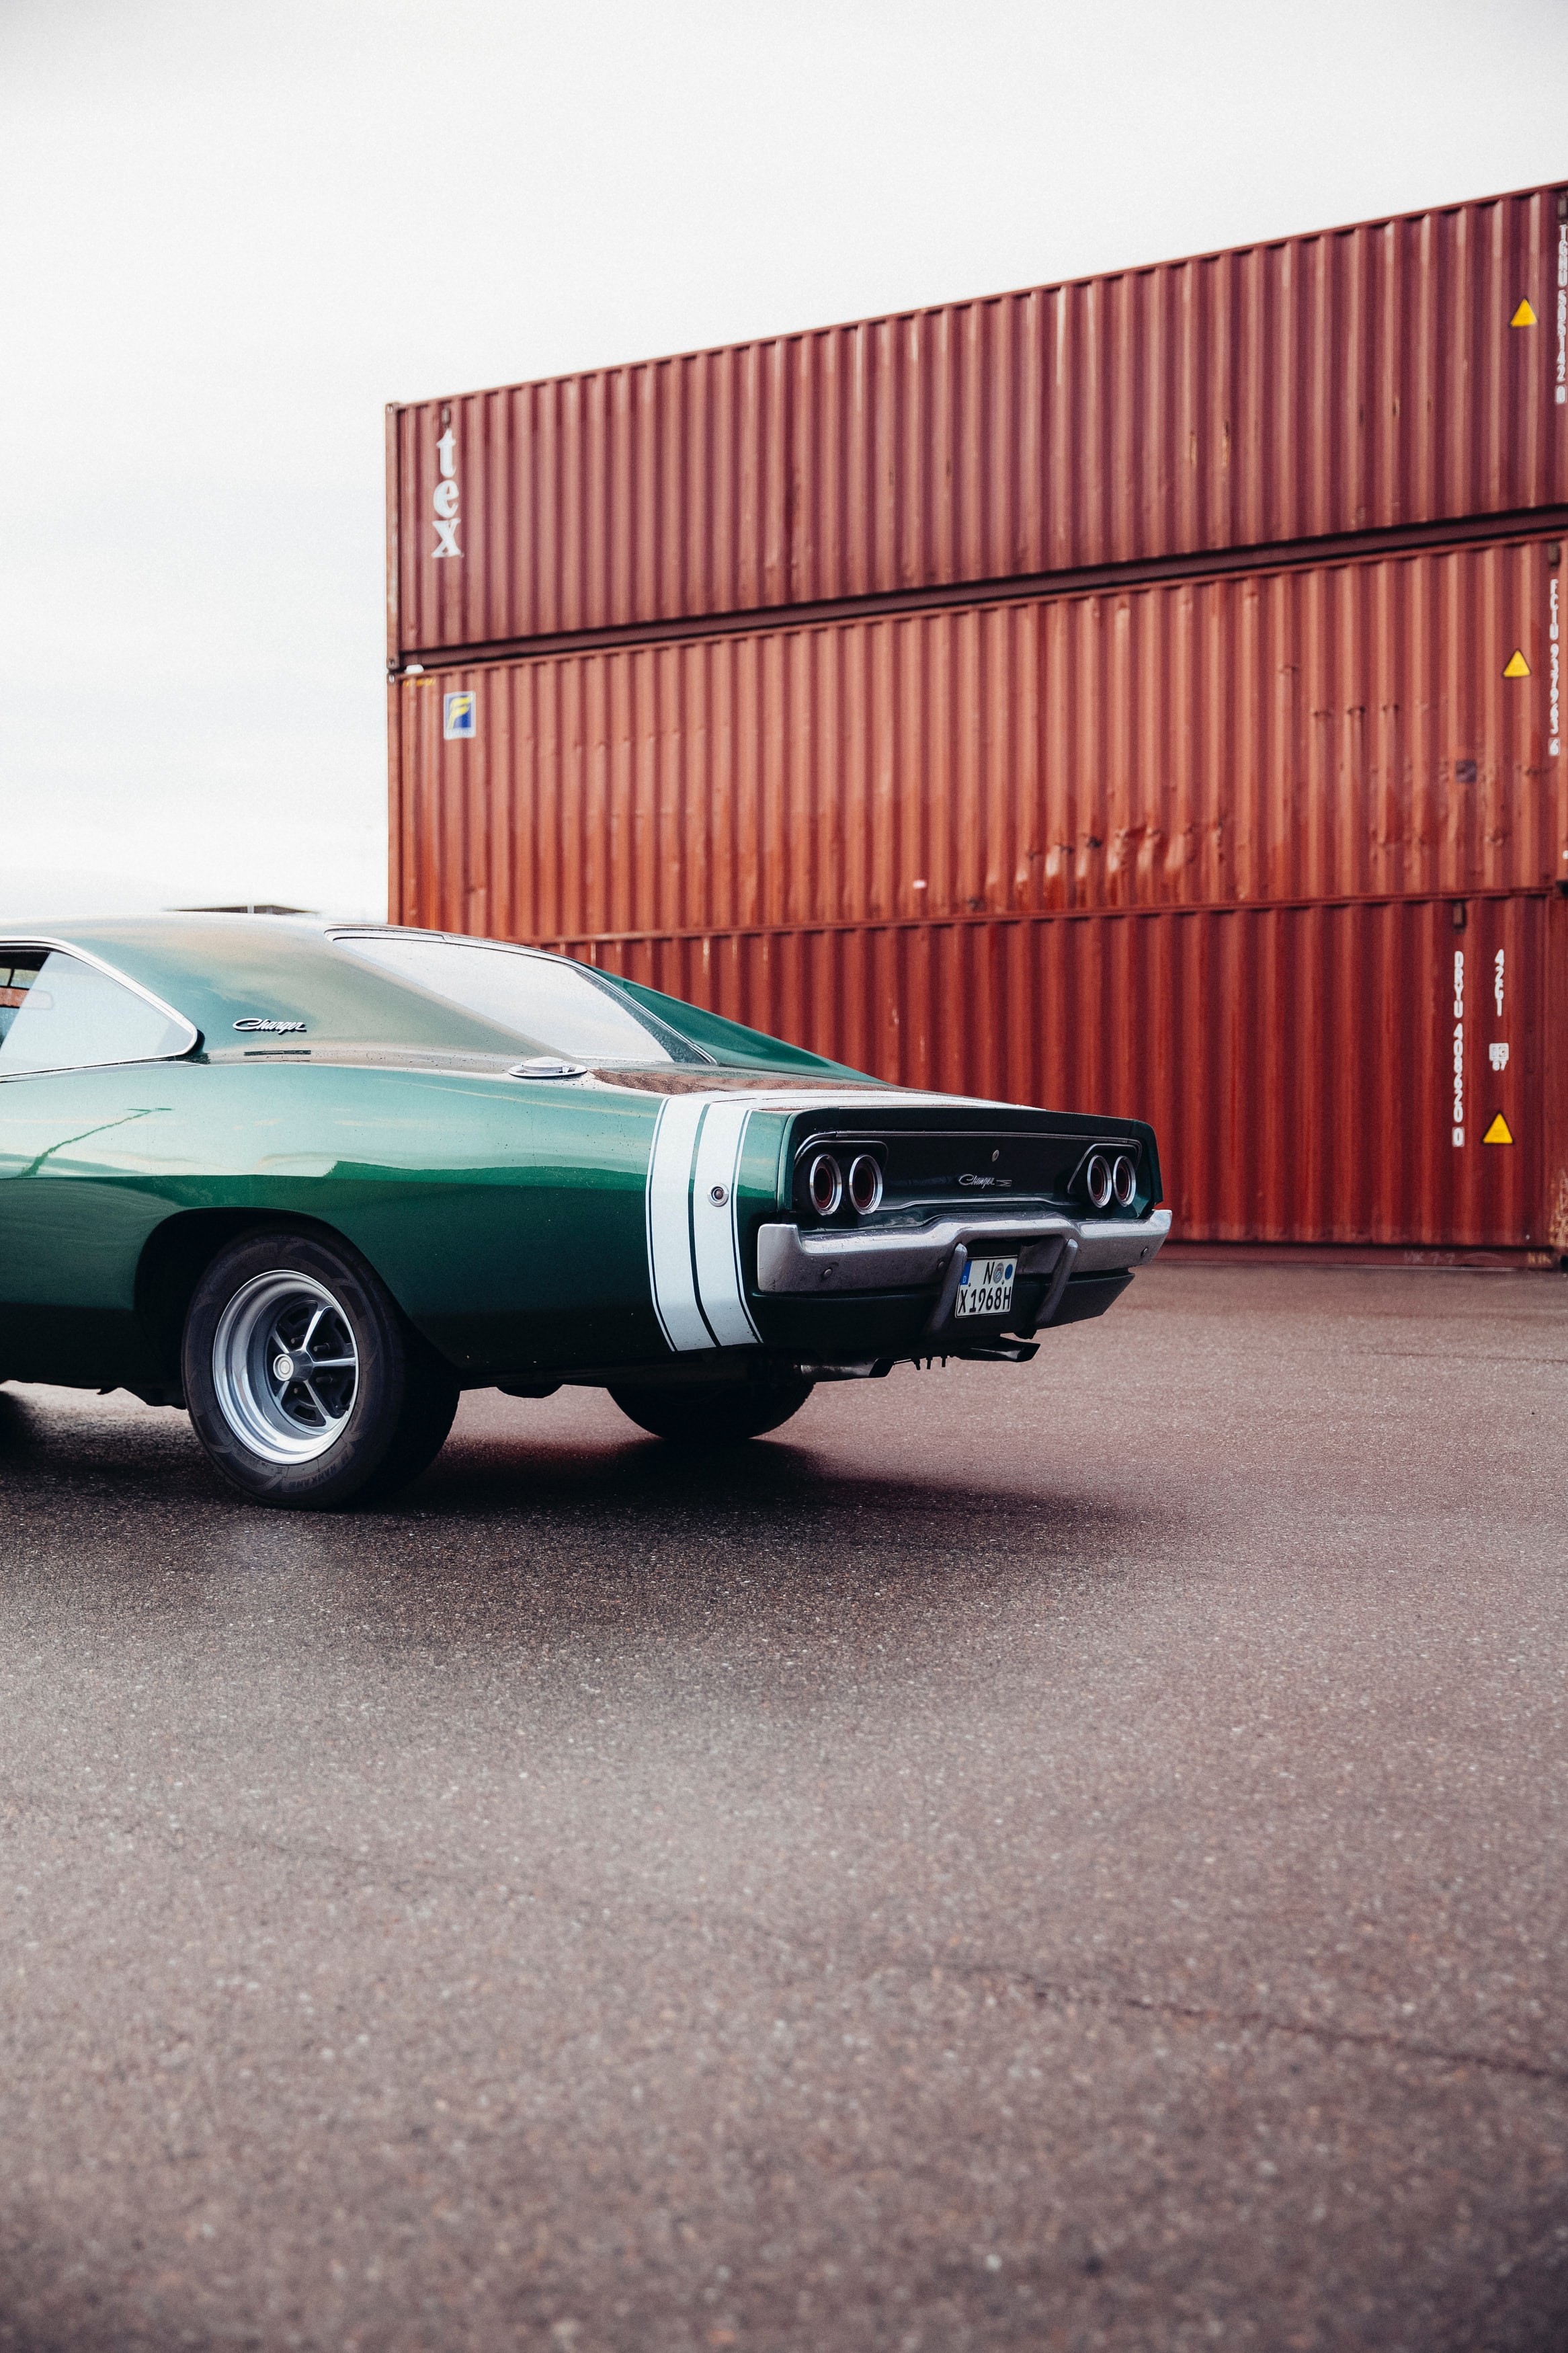 dodge, cars, green, car, retro, dodge charger